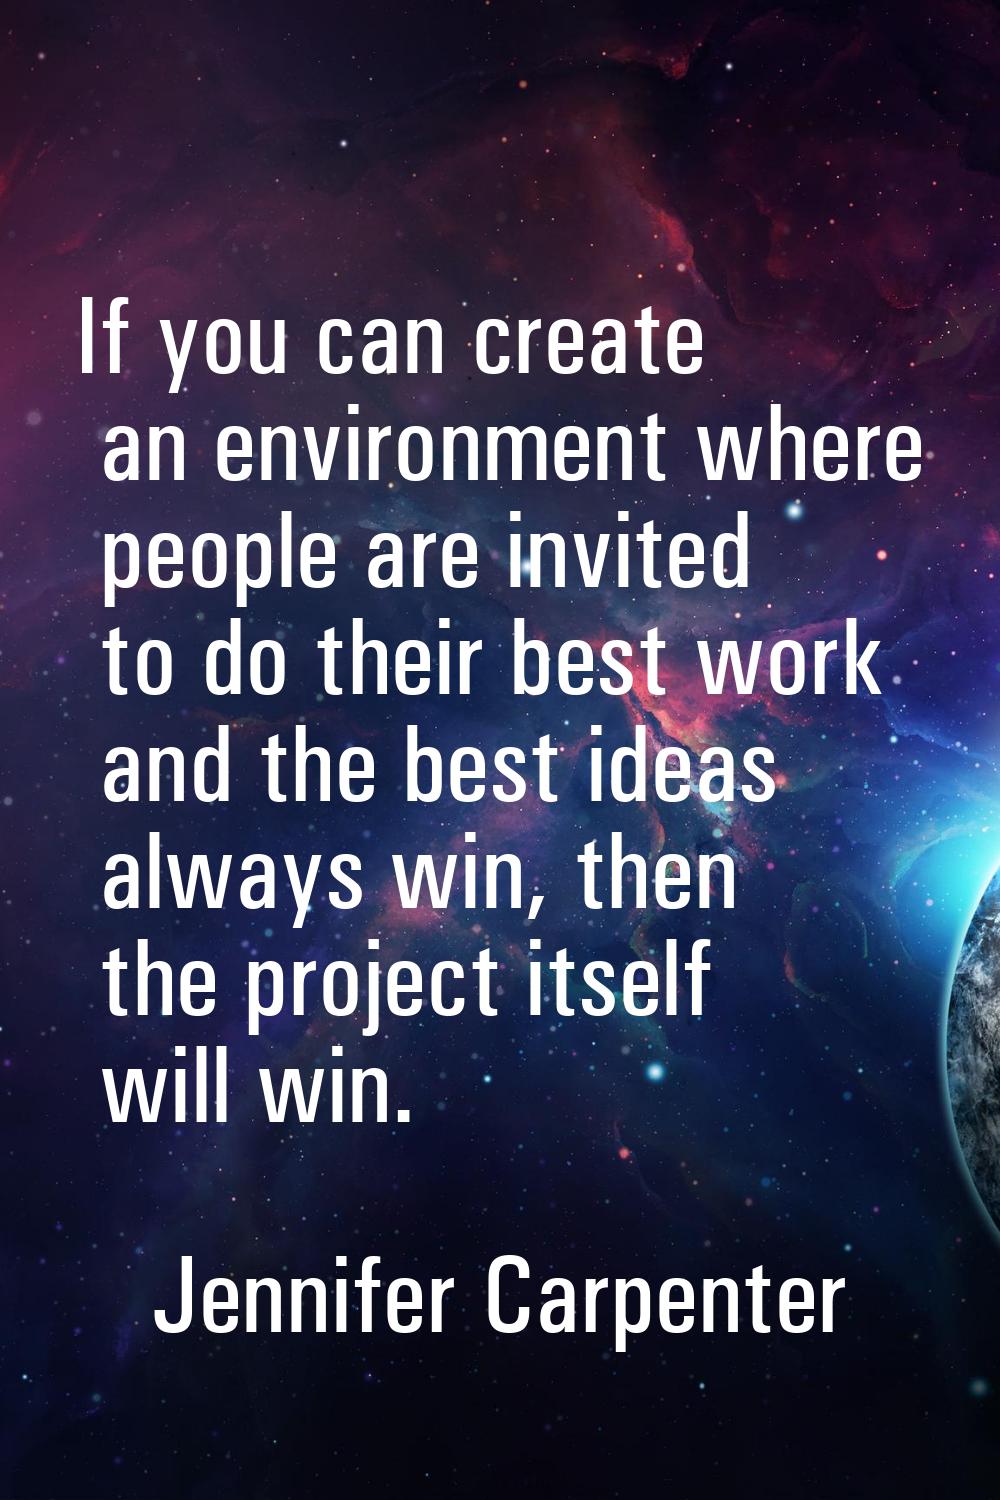 If you can create an environment where people are invited to do their best work and the best ideas 